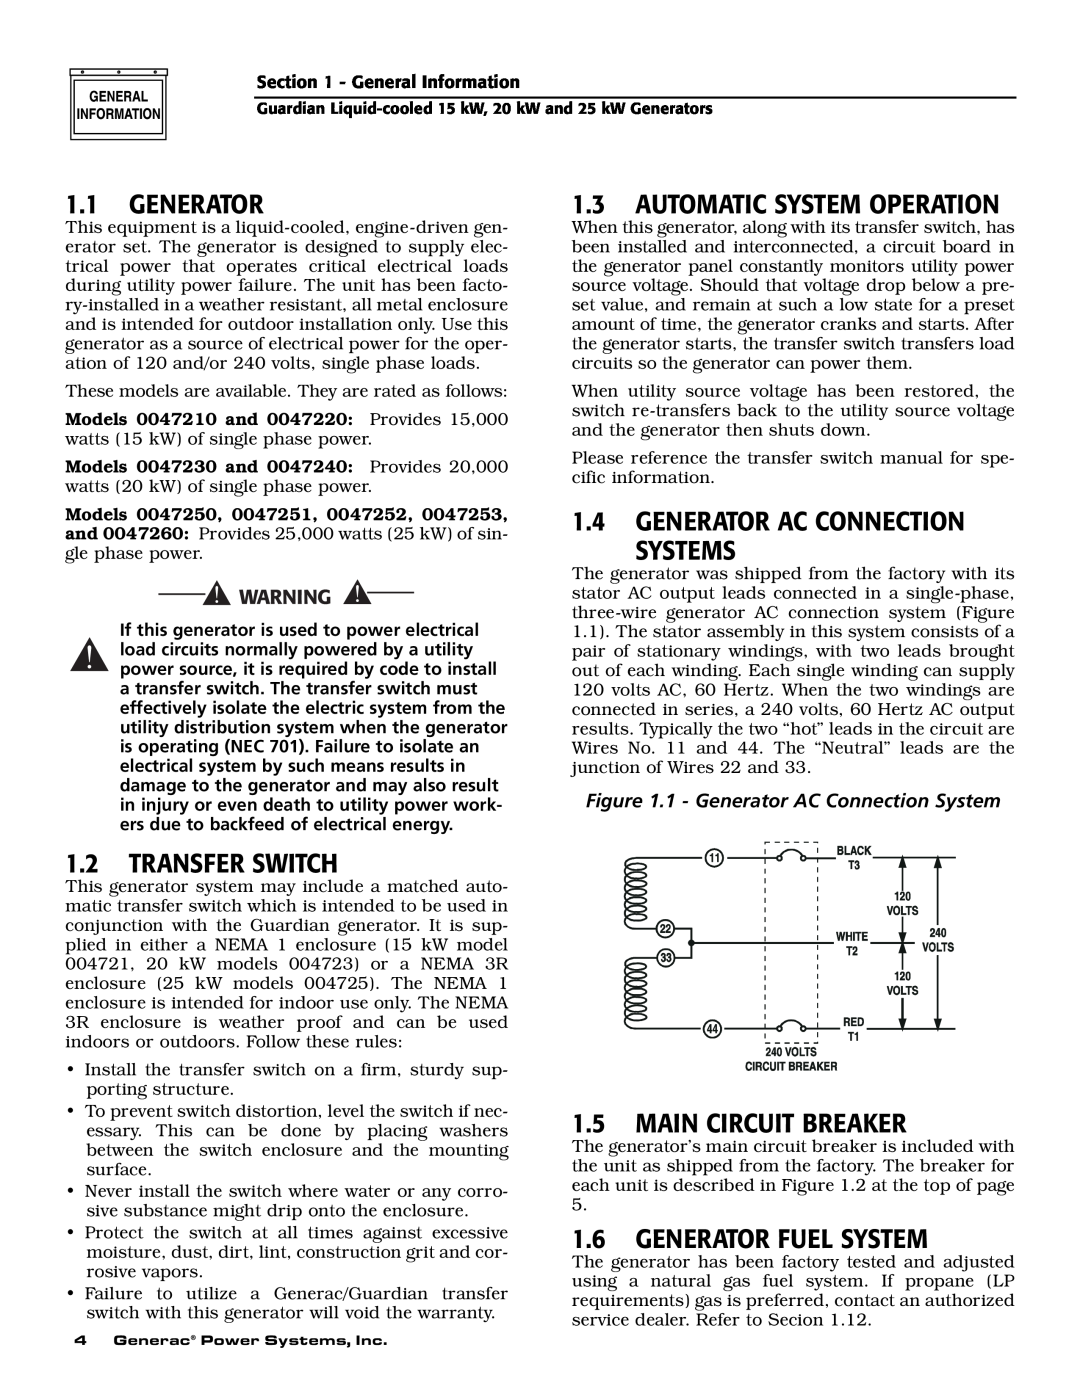 Guardian Technologies 004725-1, 004725-3 Automatic System Operation, Generator Ac Connection Systems, Transfer Switch 